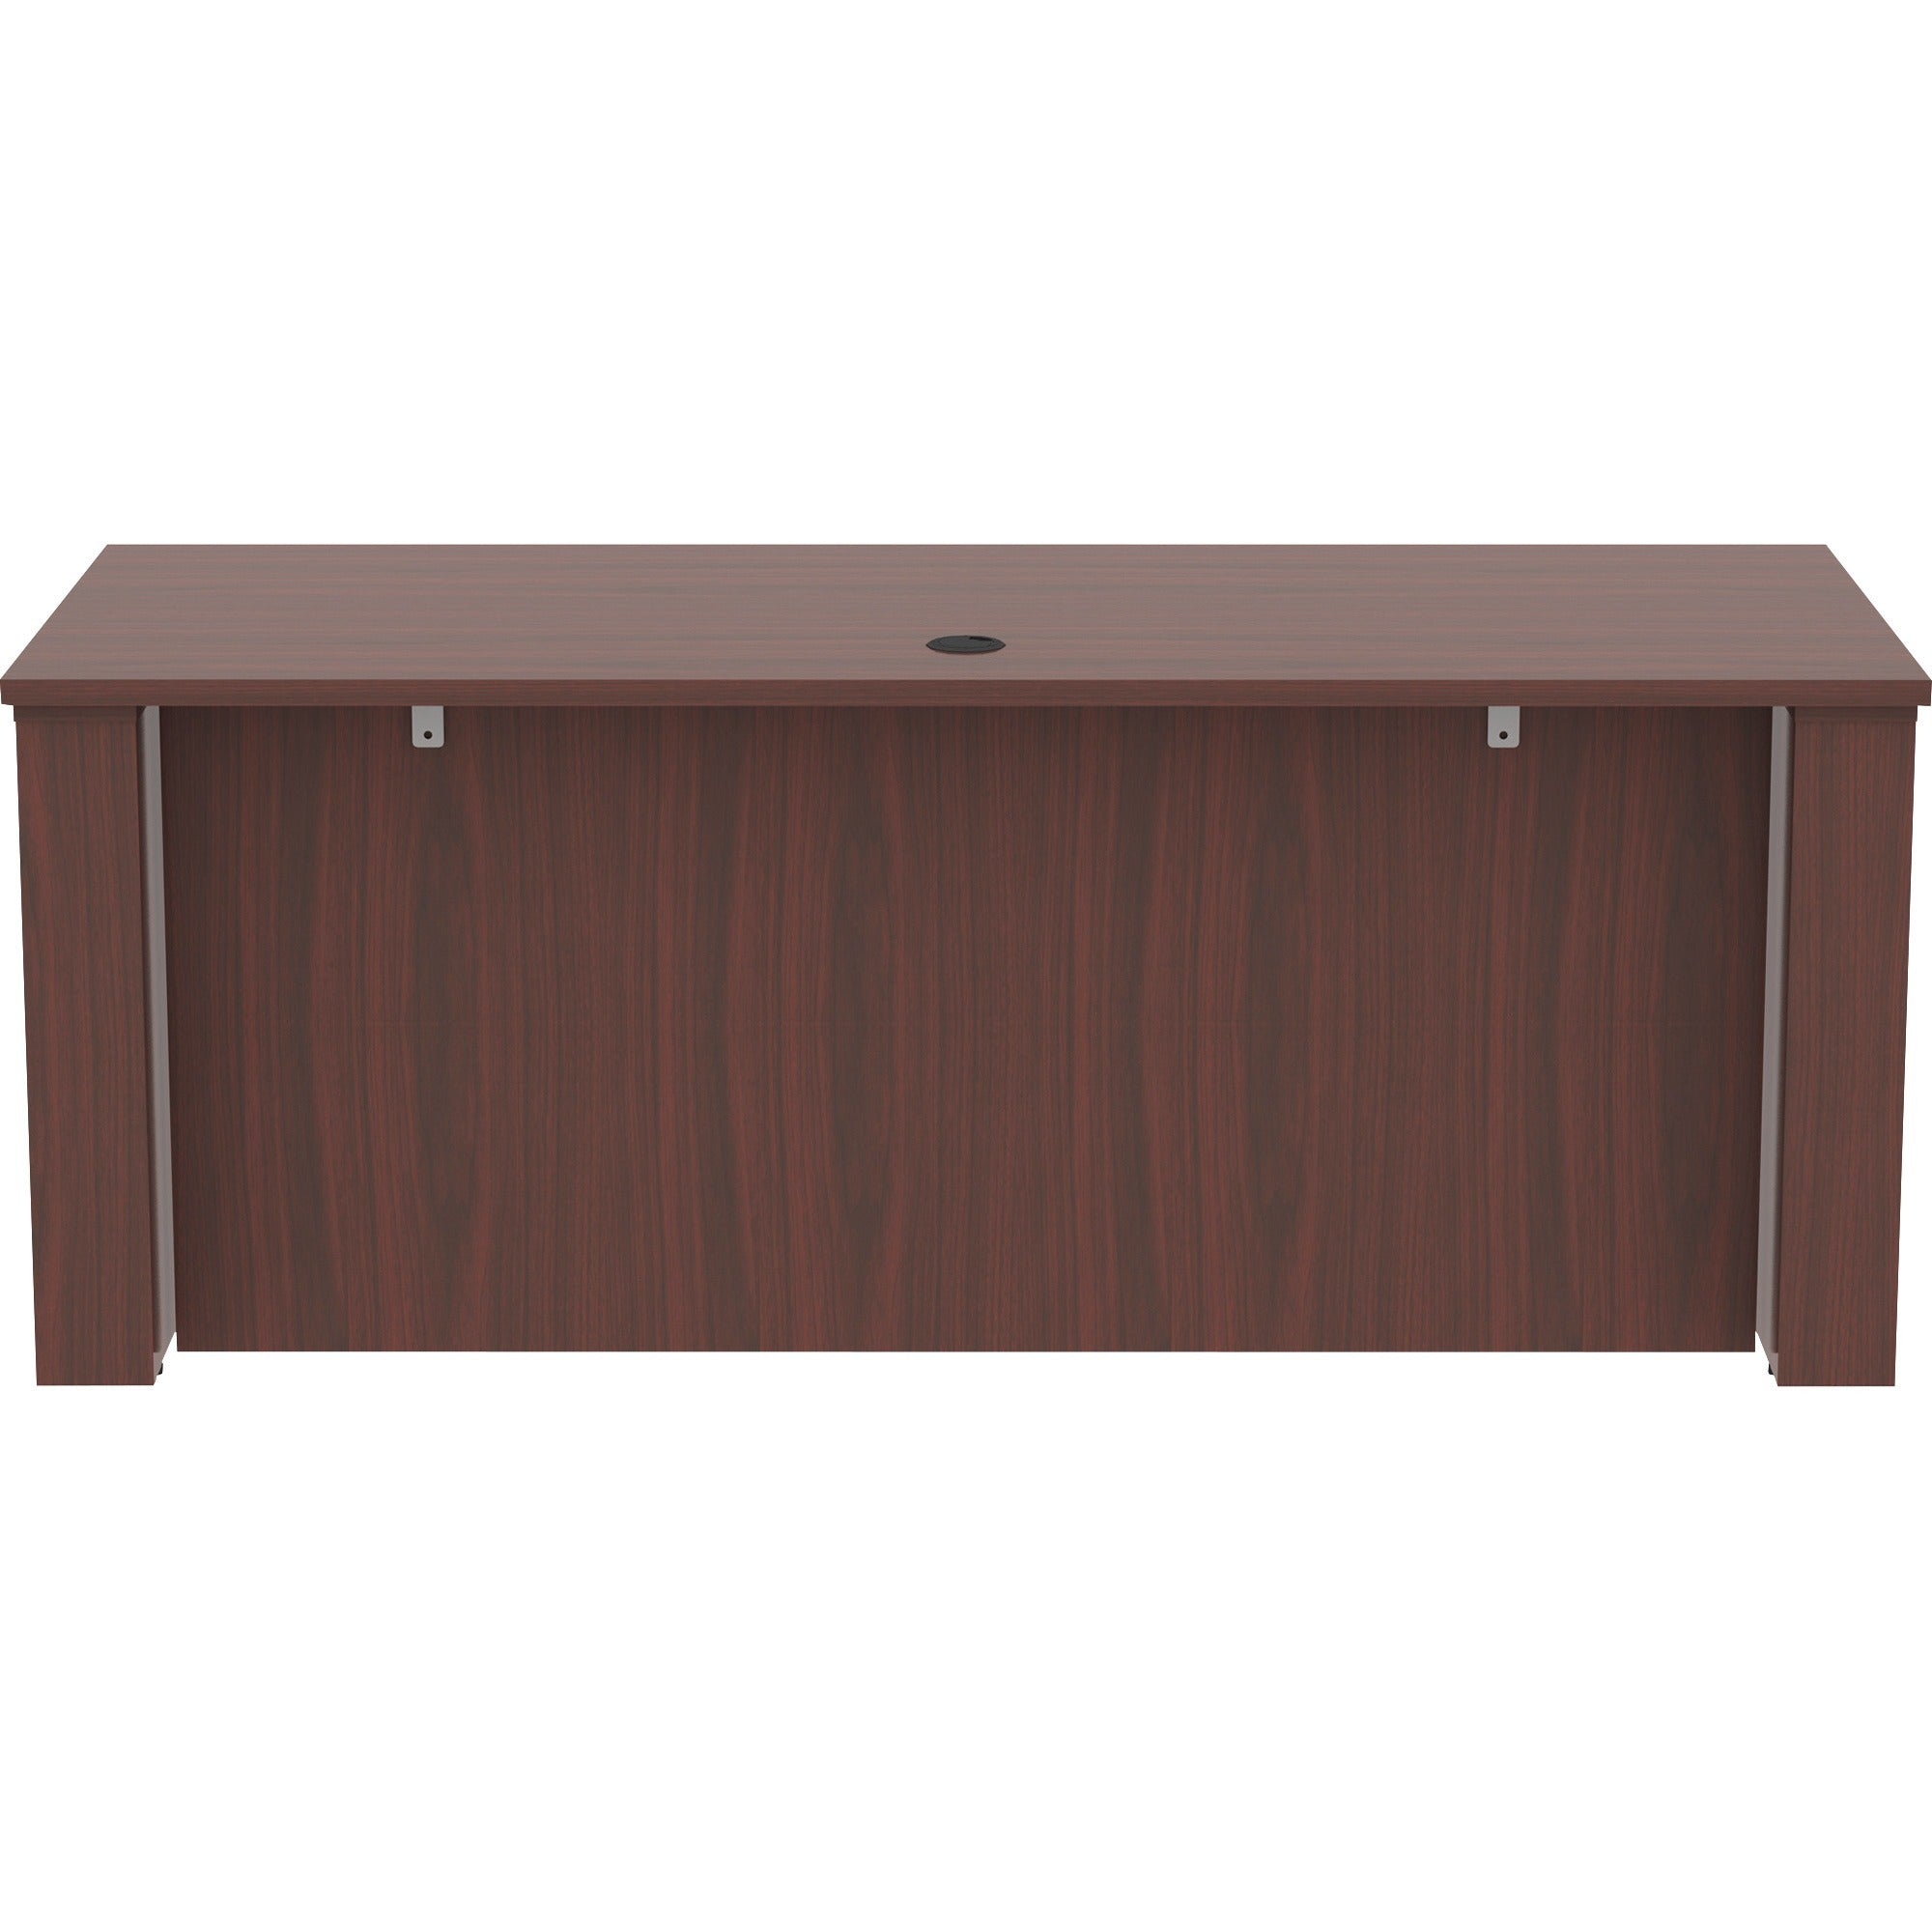 lorell-essentials-series-sit-to-stand-desk-shell-01-top-1-edge-72-x-2949-finish-mahogany-laminate-table-top_llr69574 - 4